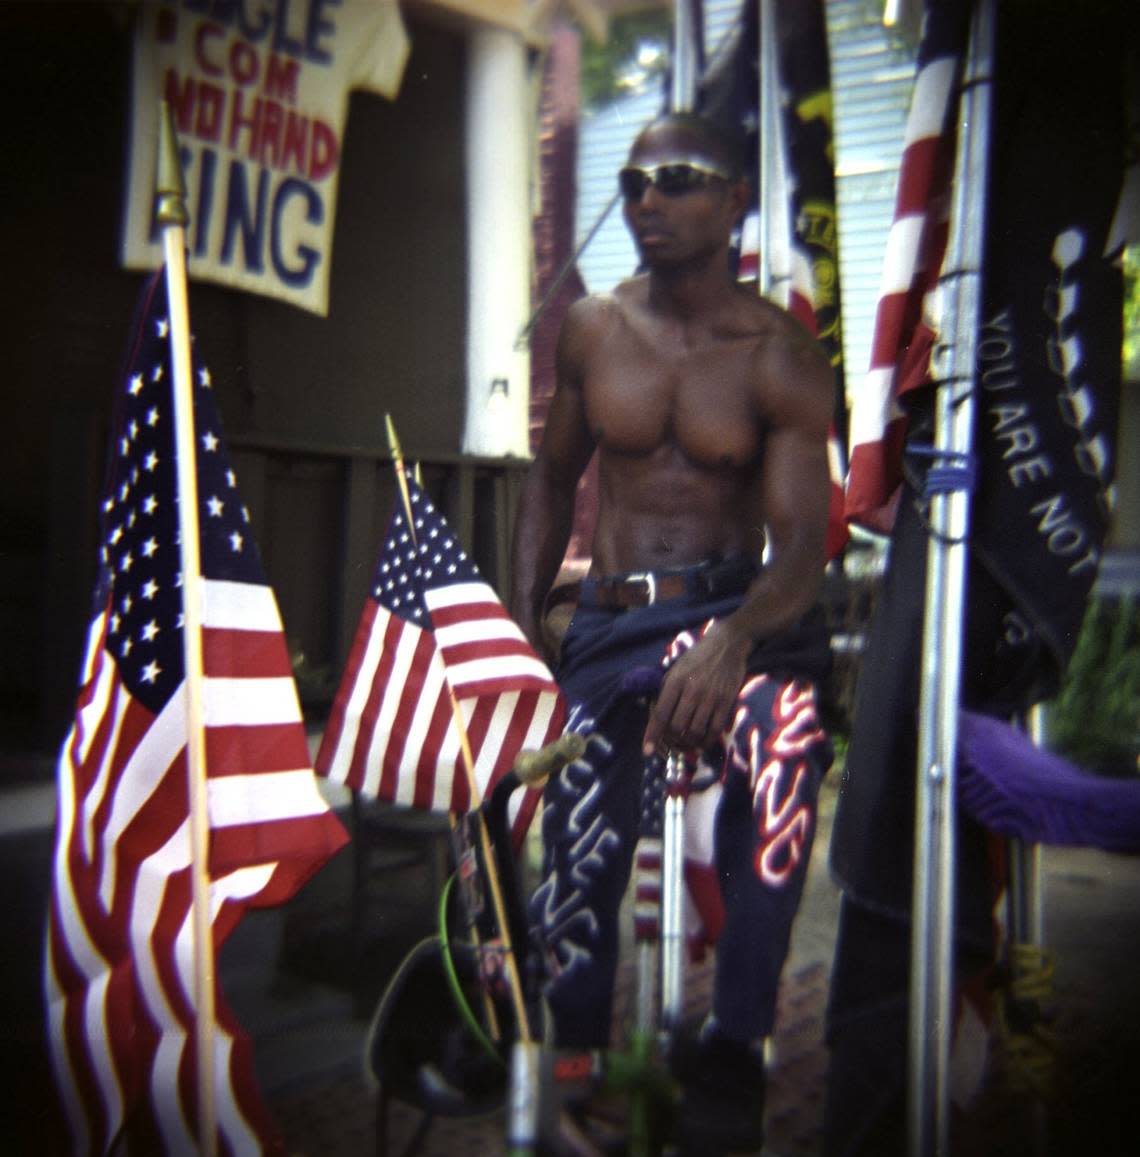 “I’m doing this in honor of the troops,” says the No Hand King, Rodney Hines, shown in this file photo with the American flag from all of his trick bikes in Raleigh. Staff Photo by Juli Leonard